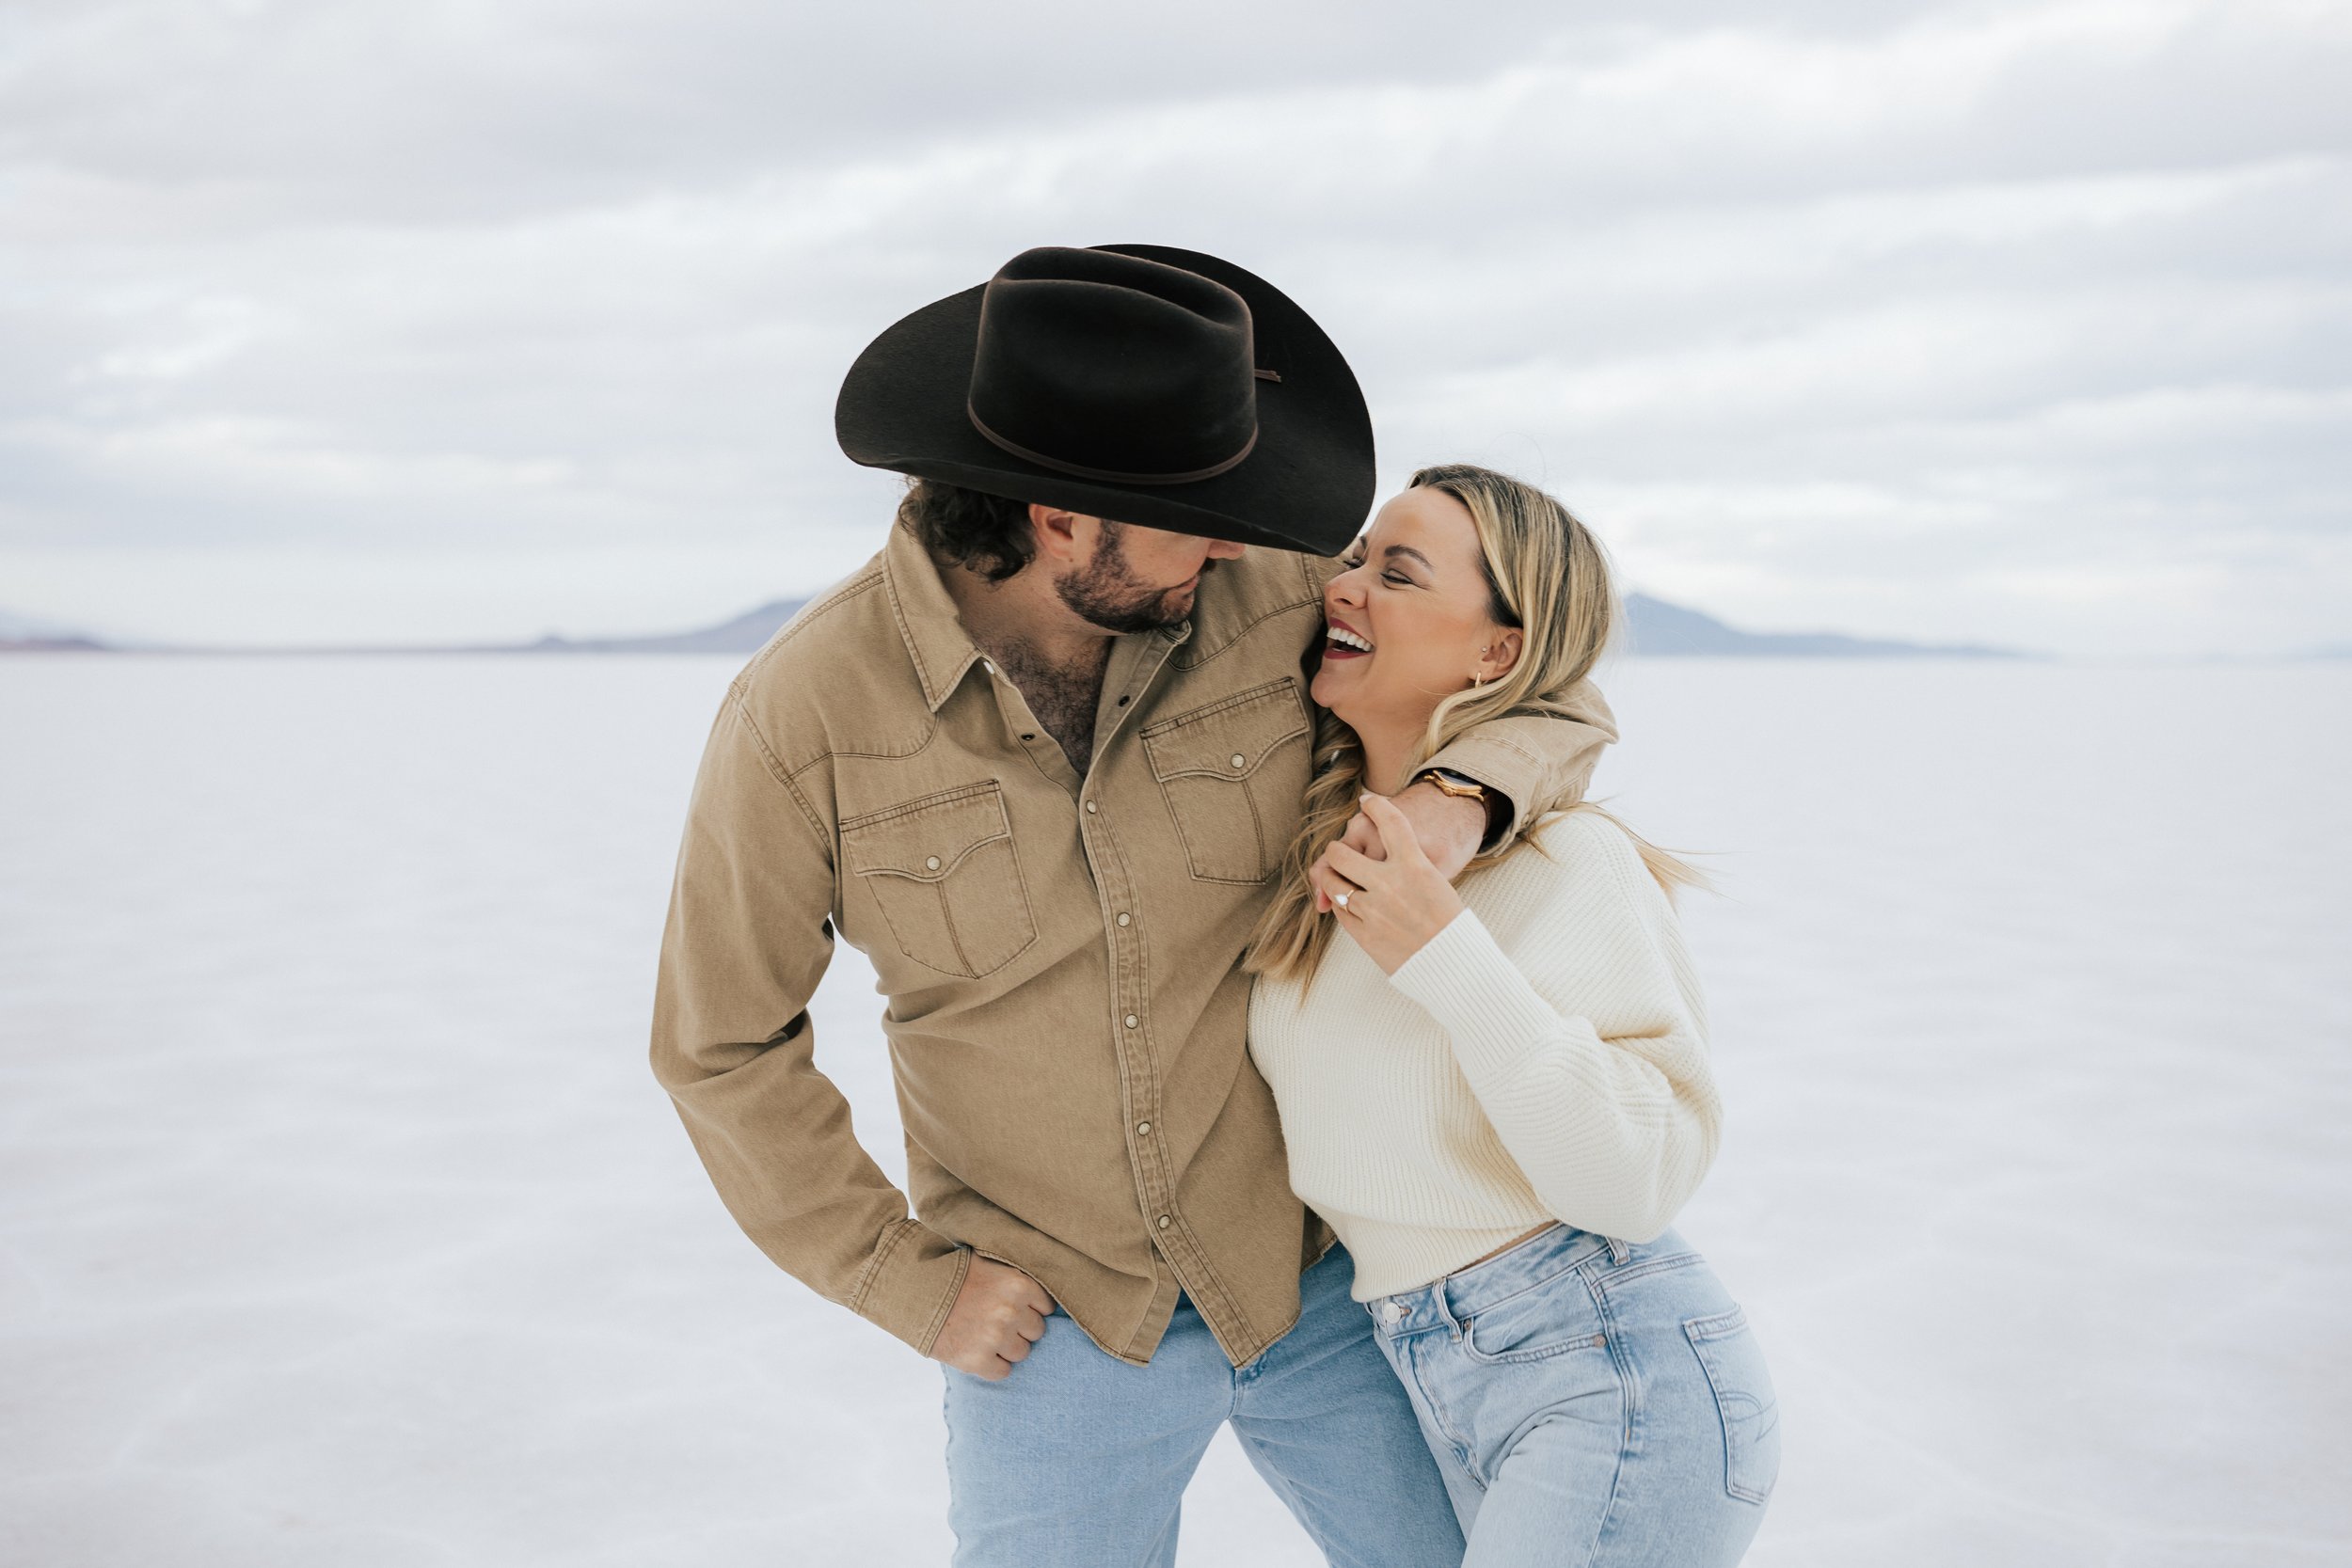  Photo of an engaged couple as they kiss and hug at the Bonneville Salt Flats near Wendover, Nevada and Salt Lake City, Utah. Cowboy and his girl walk together with his arm around her shoulder. The Salt Flats are white and the sky is overcast. The mo